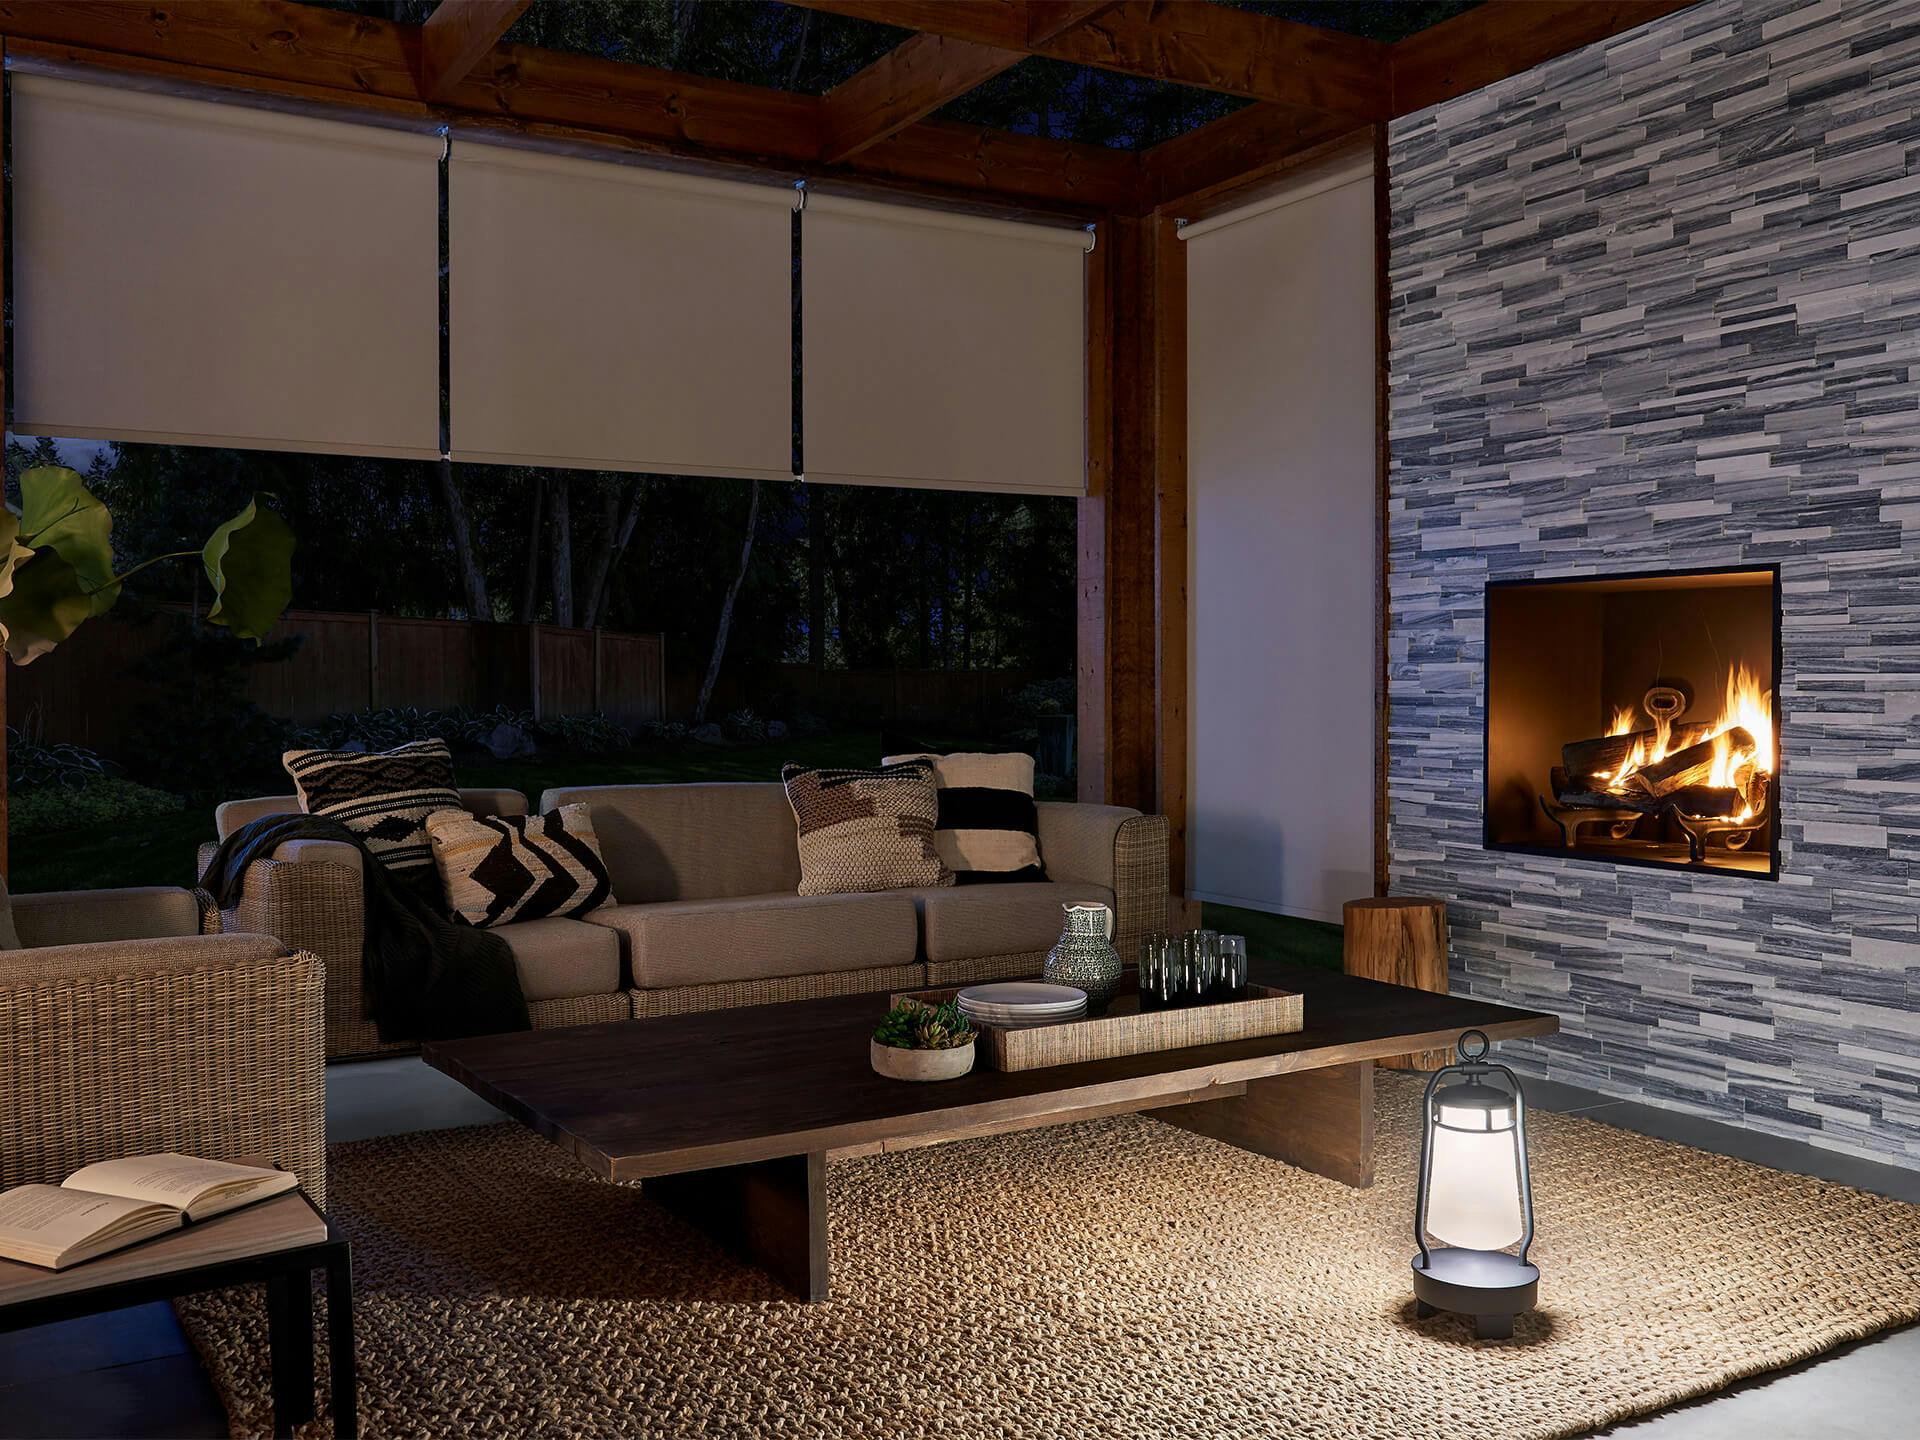 Cozy modern patio with a fireplace and Lyndon lantern on the ground